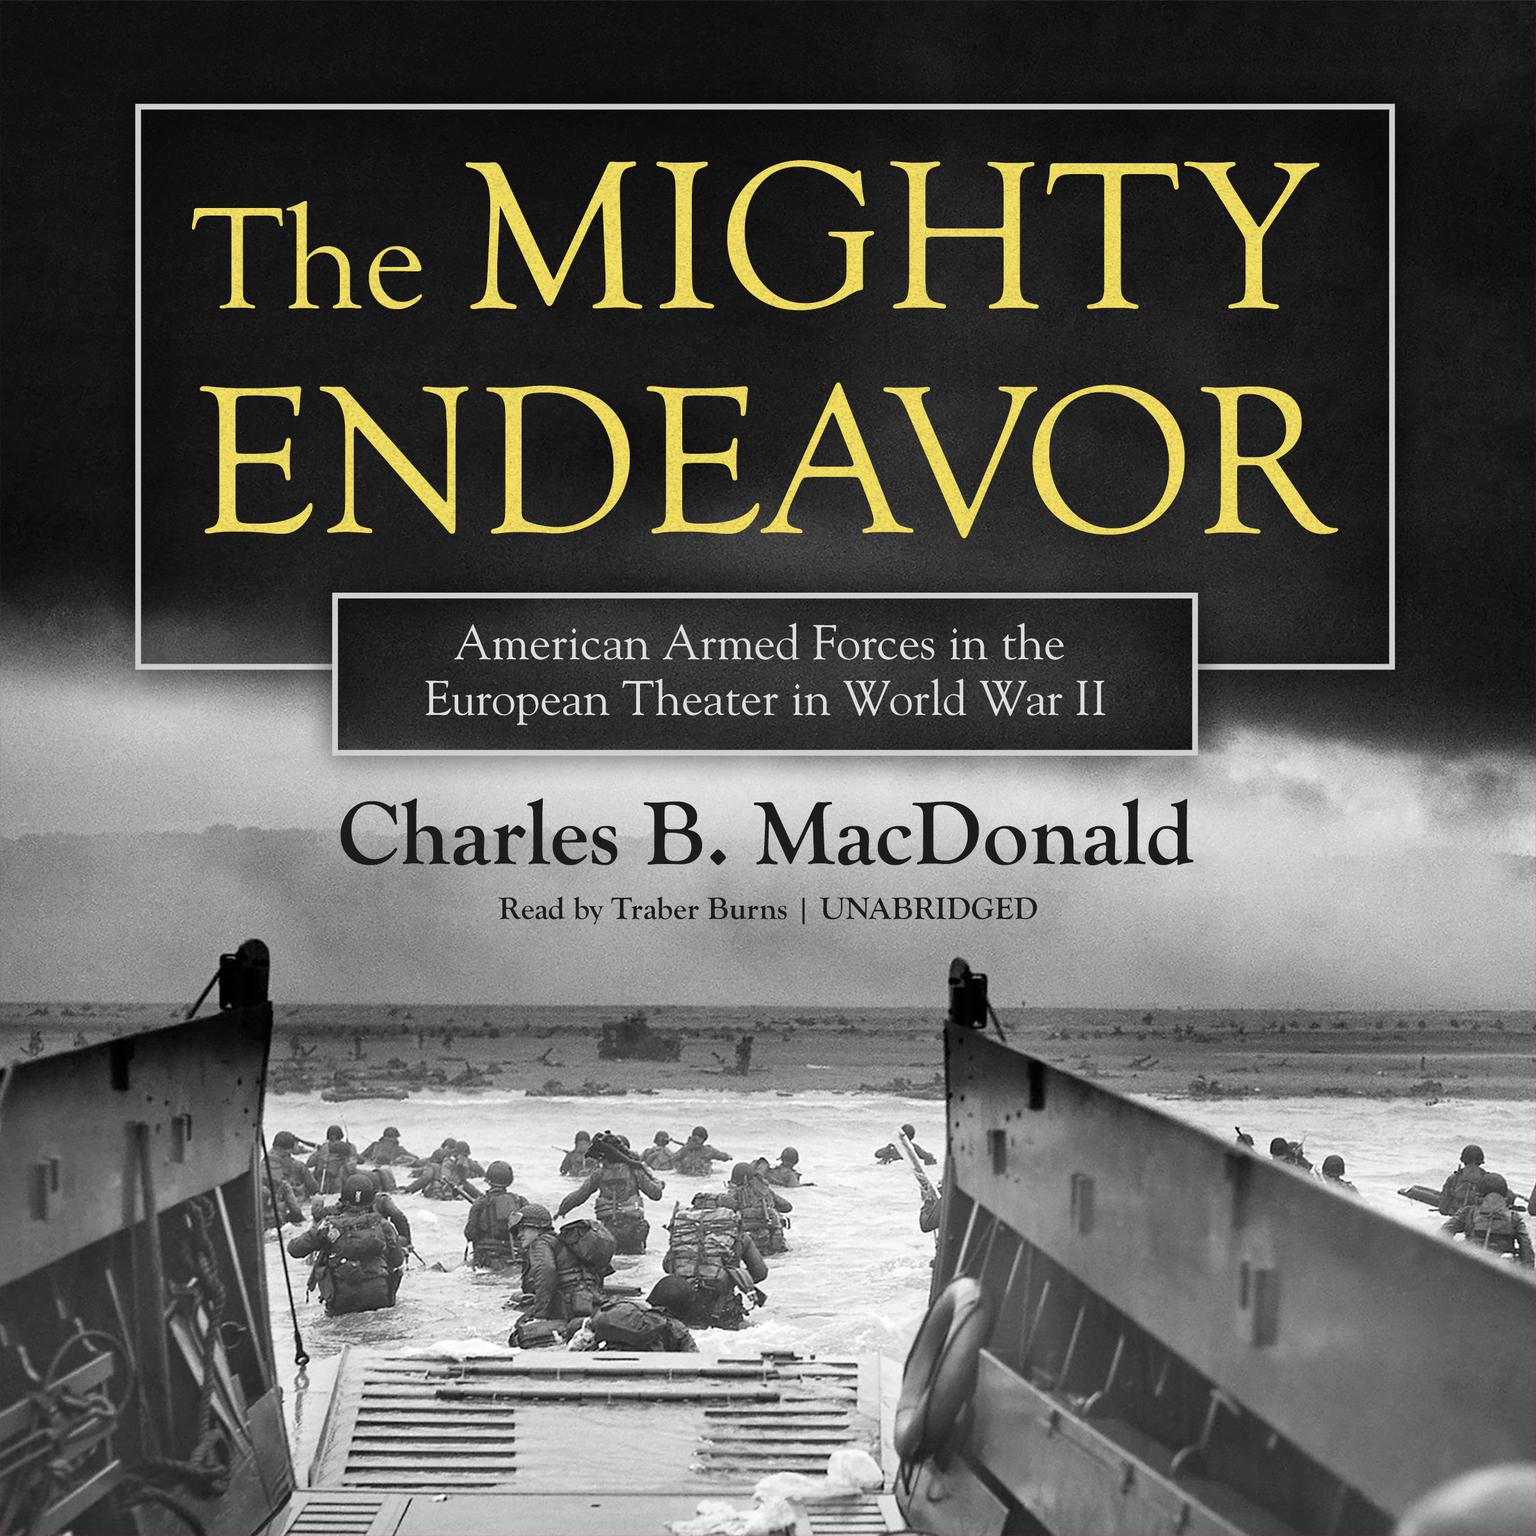 The Mighty Endeavor: American Armed Forces in the European Theater in World War II Audiobook, by Charles B. MacDonald